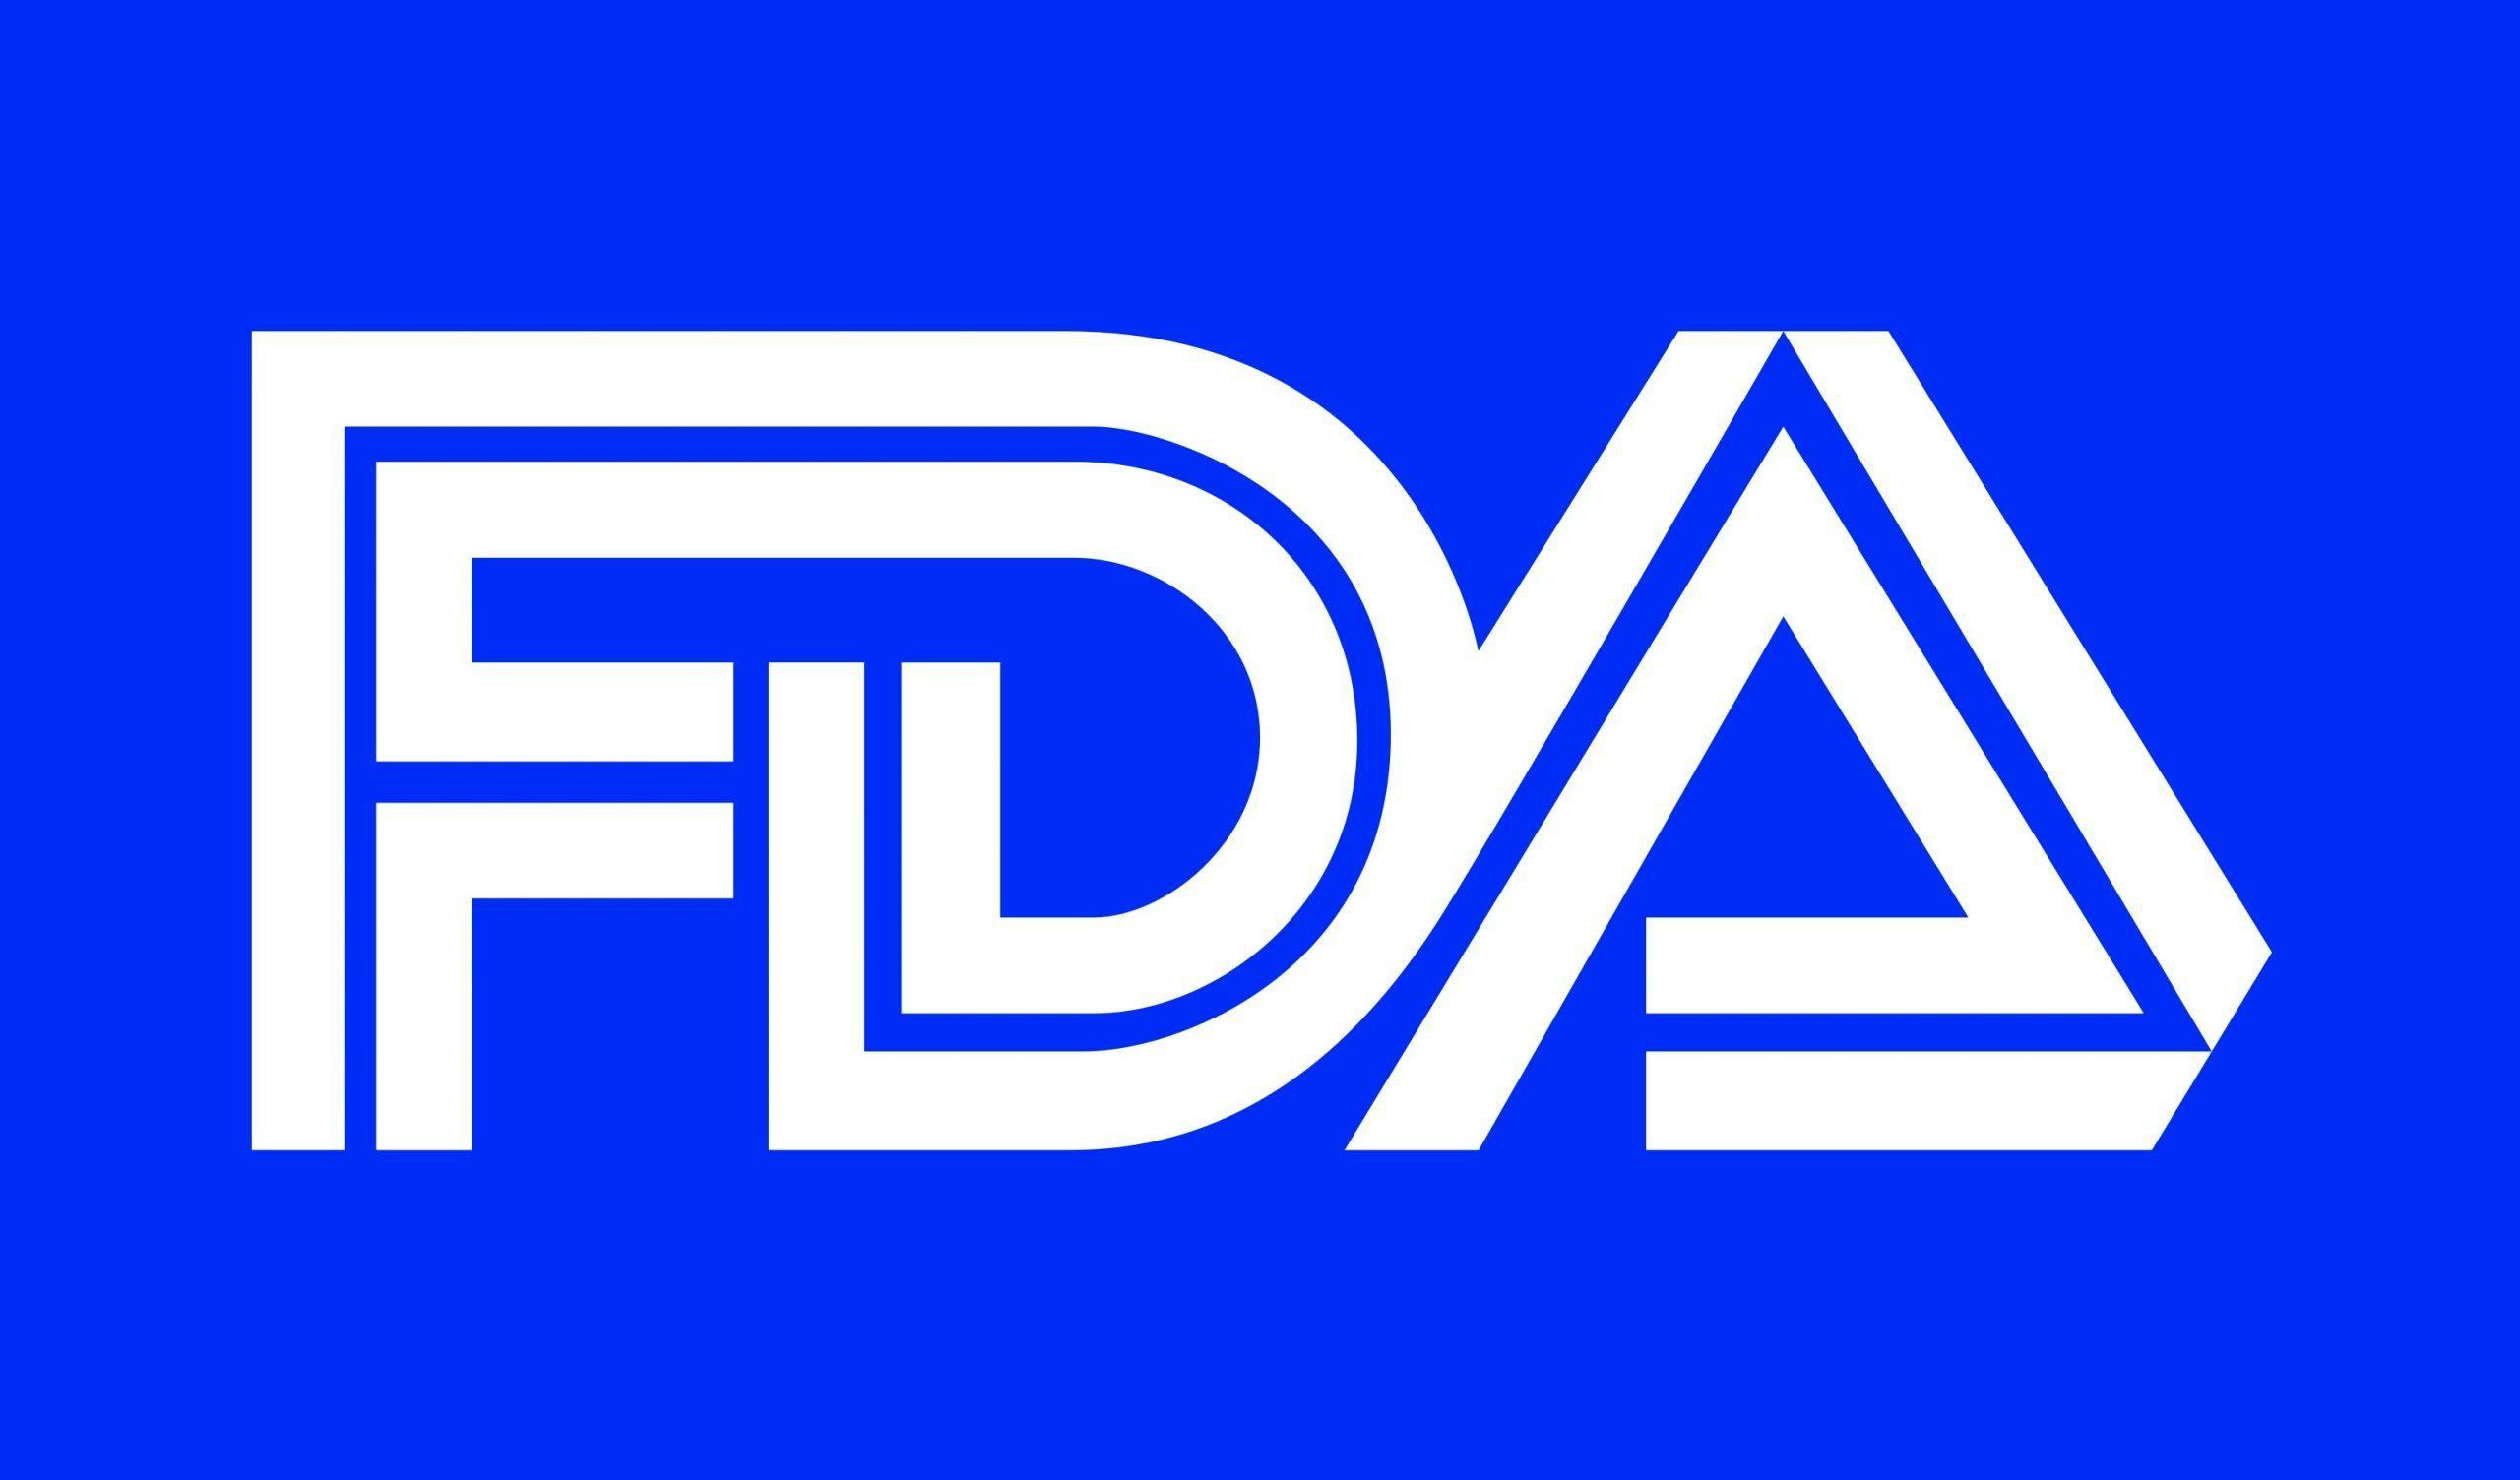 FDA Updates for the Week of April 18, 2022